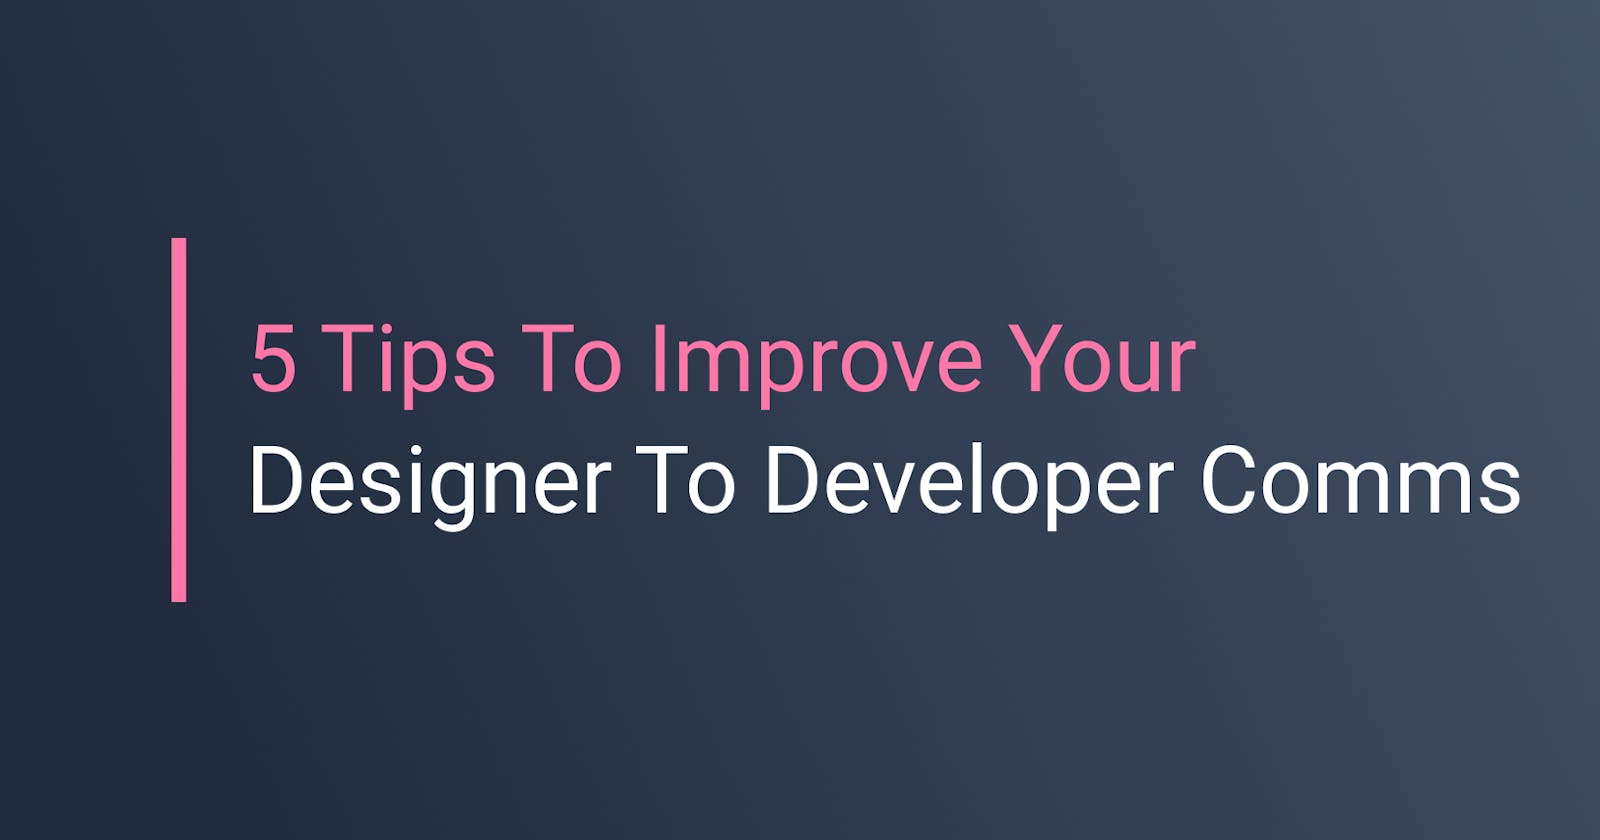 These 5 Tips Will Improve Your Designer To Developer Communications Today